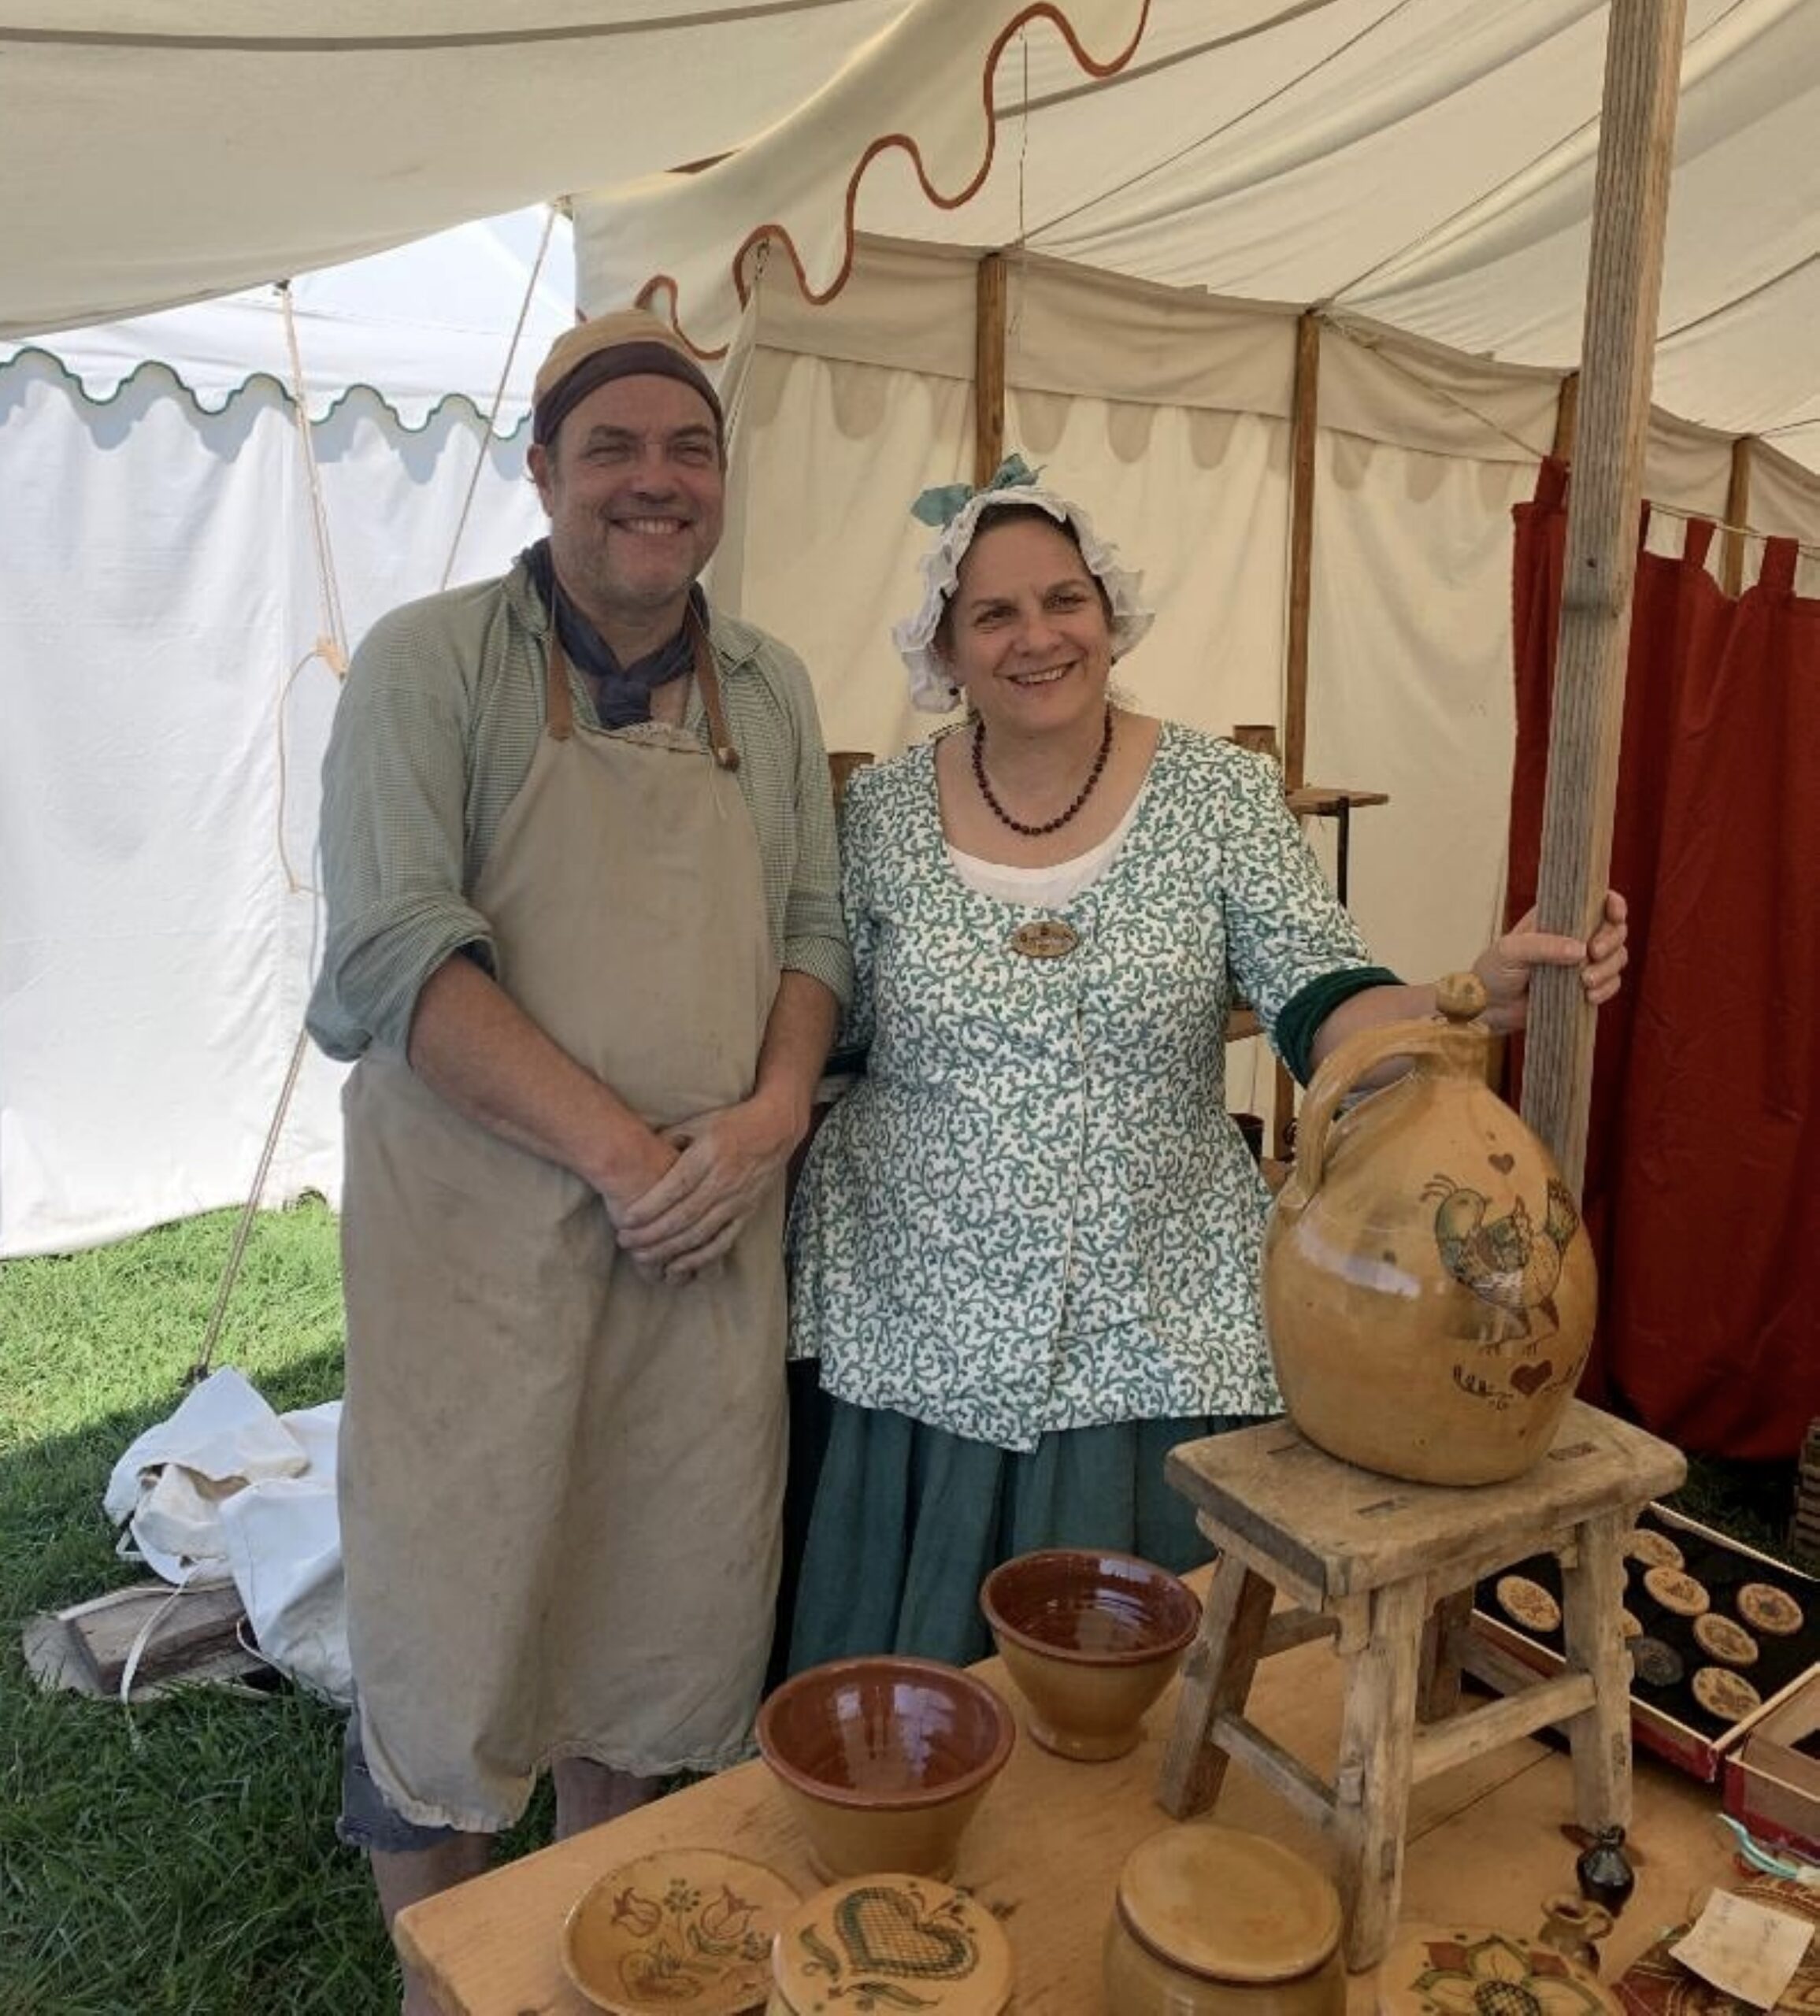 erich and janice standing behind a display of completed glazed pottery, dressed in colonial garb